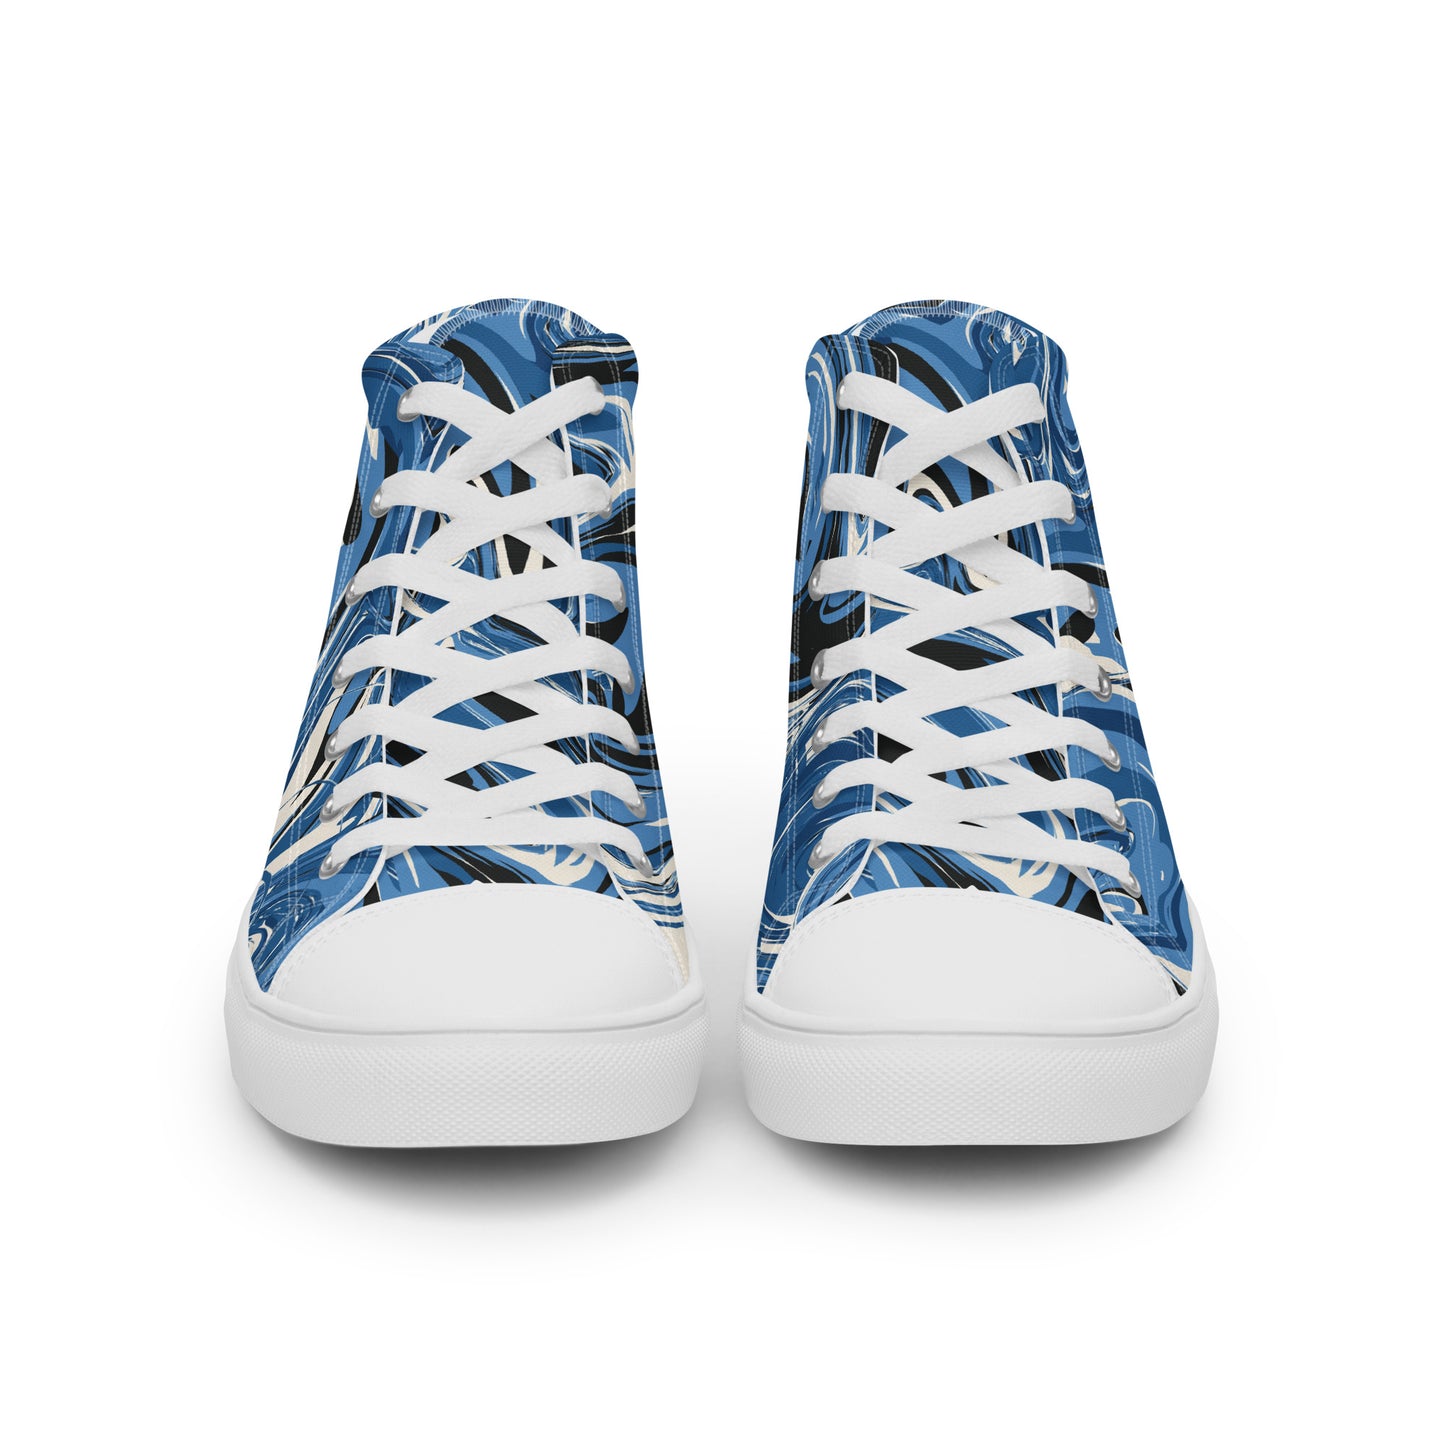 Hendrix high top canvas shoes